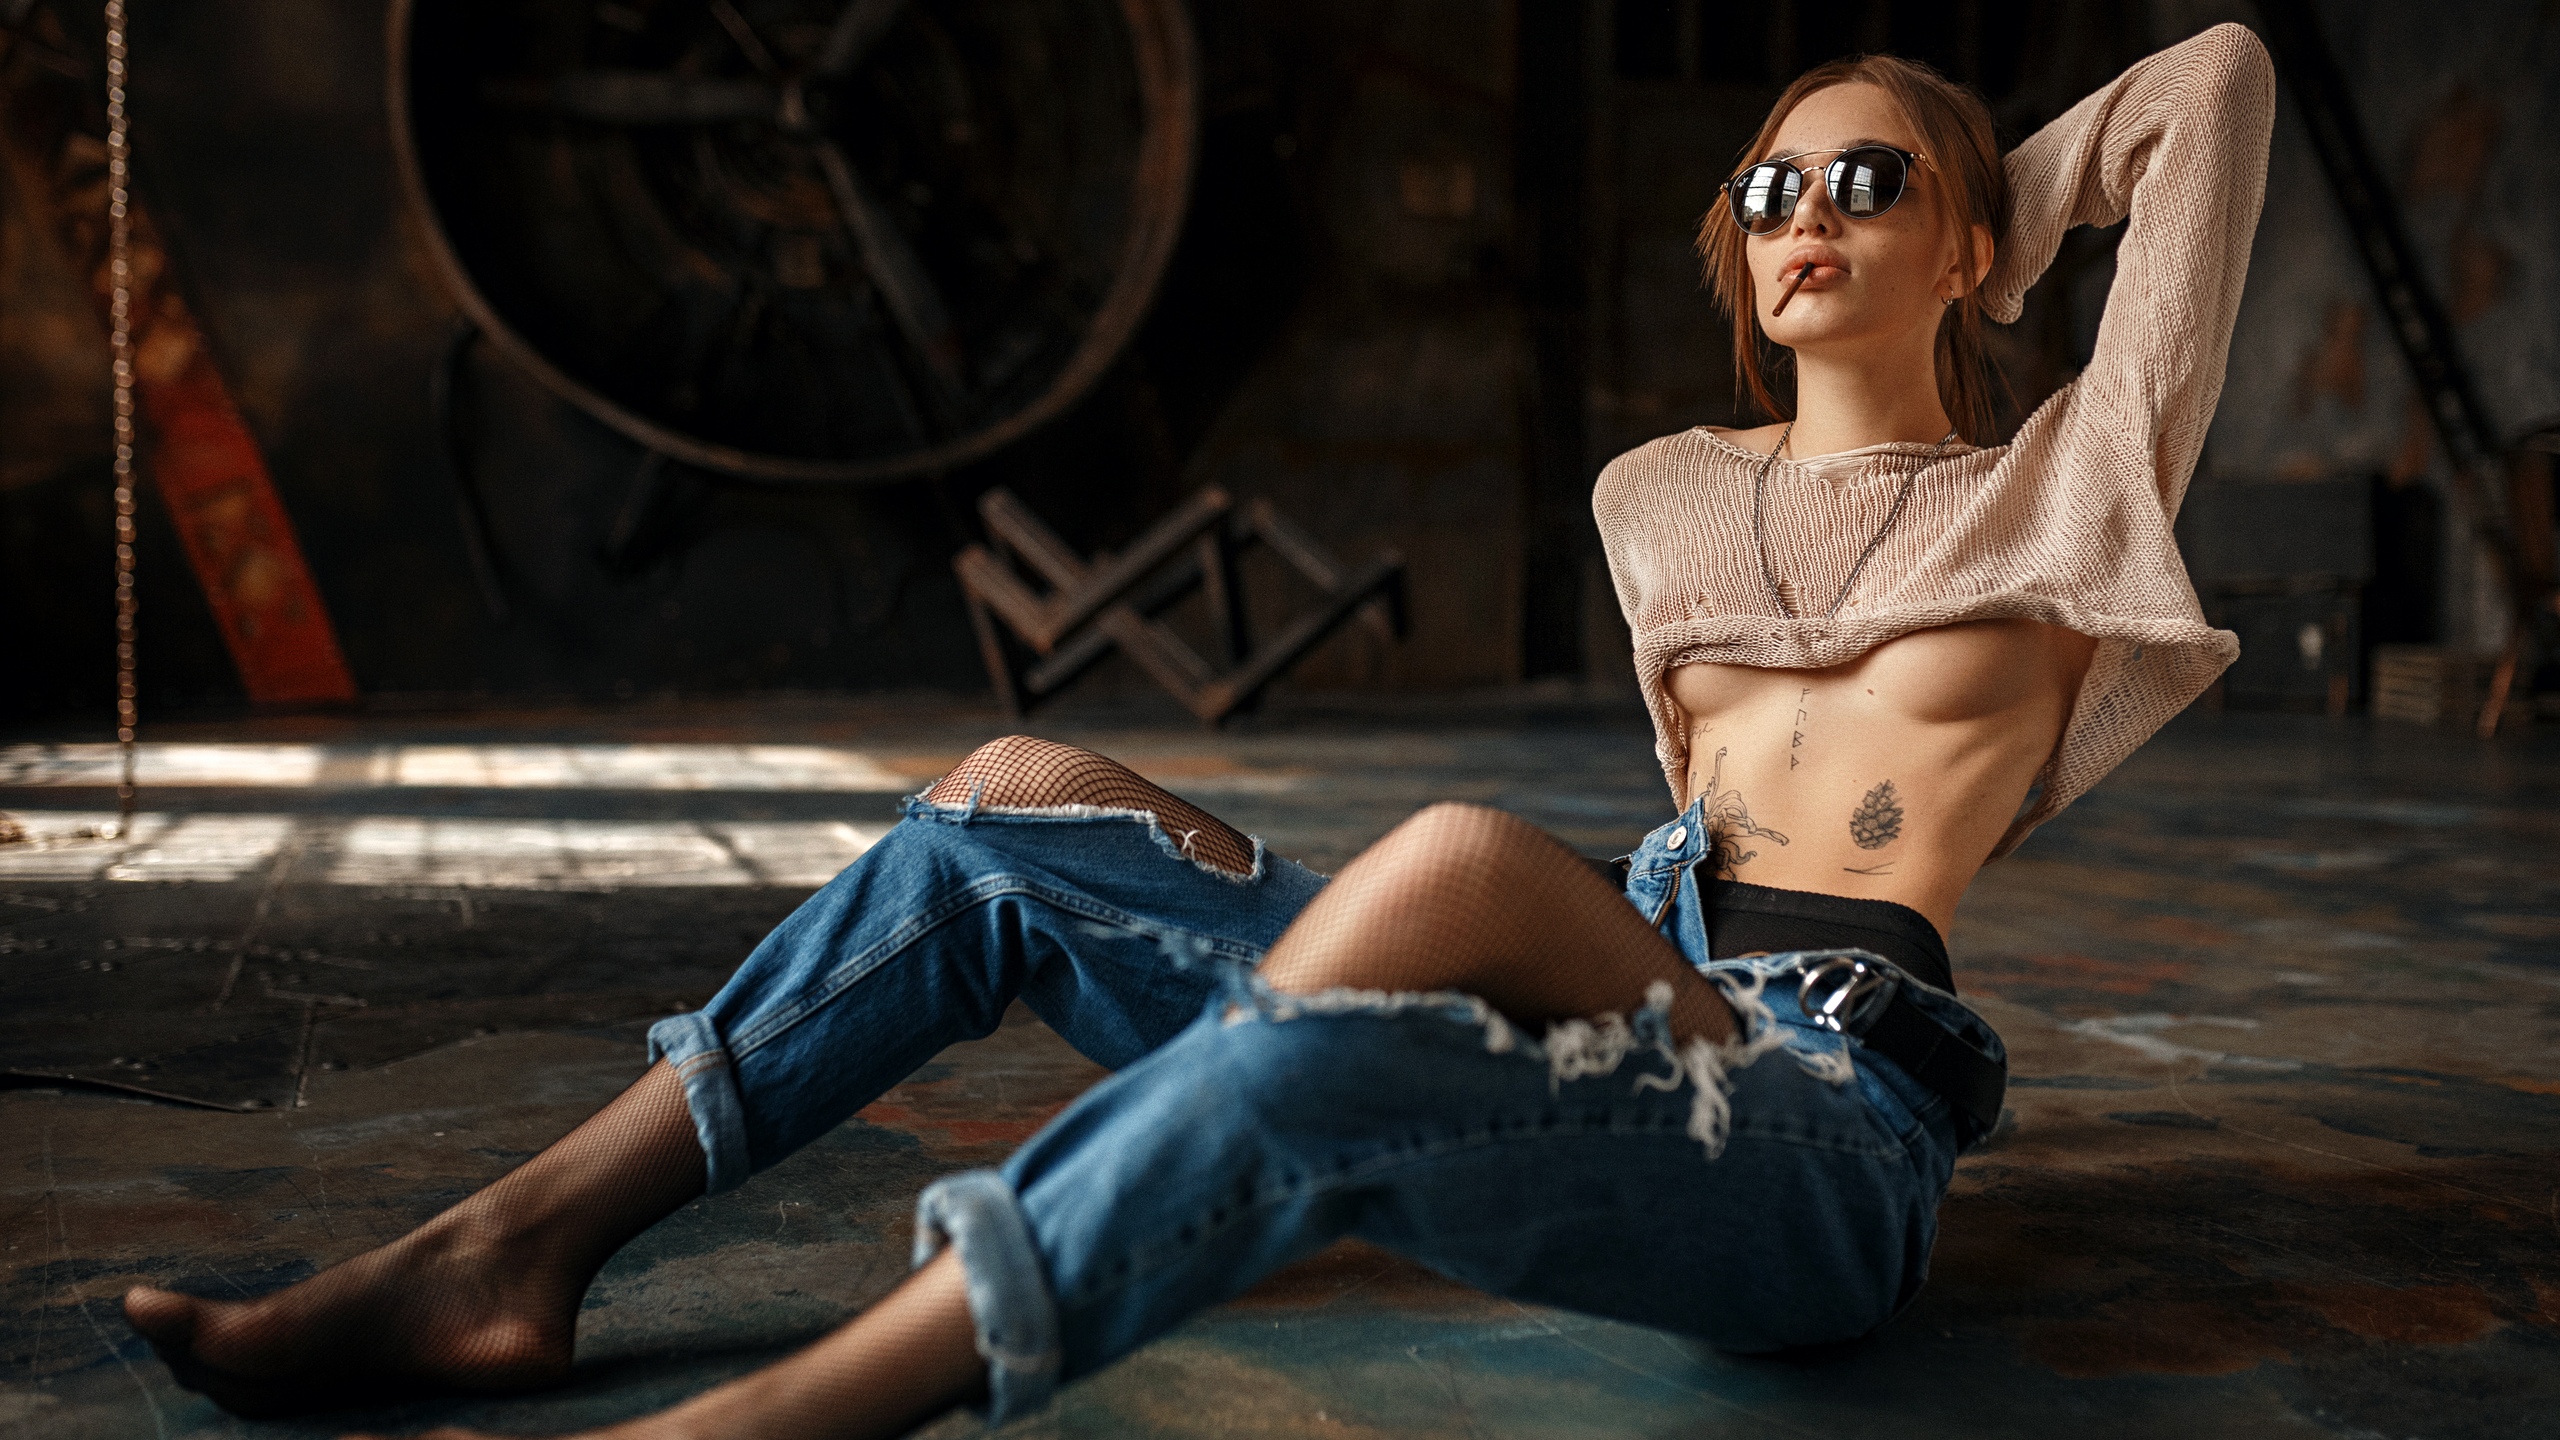 People 2560x1440 Anastasia Zakieva women model brunette women with shades juicy lips sunglasses cigarettes necklace sweater knit fabric crop top no bra underboob belt jeans torn jeans torn clothes fishnet pantyhose sitting bokeh tattoo inked girls indoors women indoors smoking barefoot